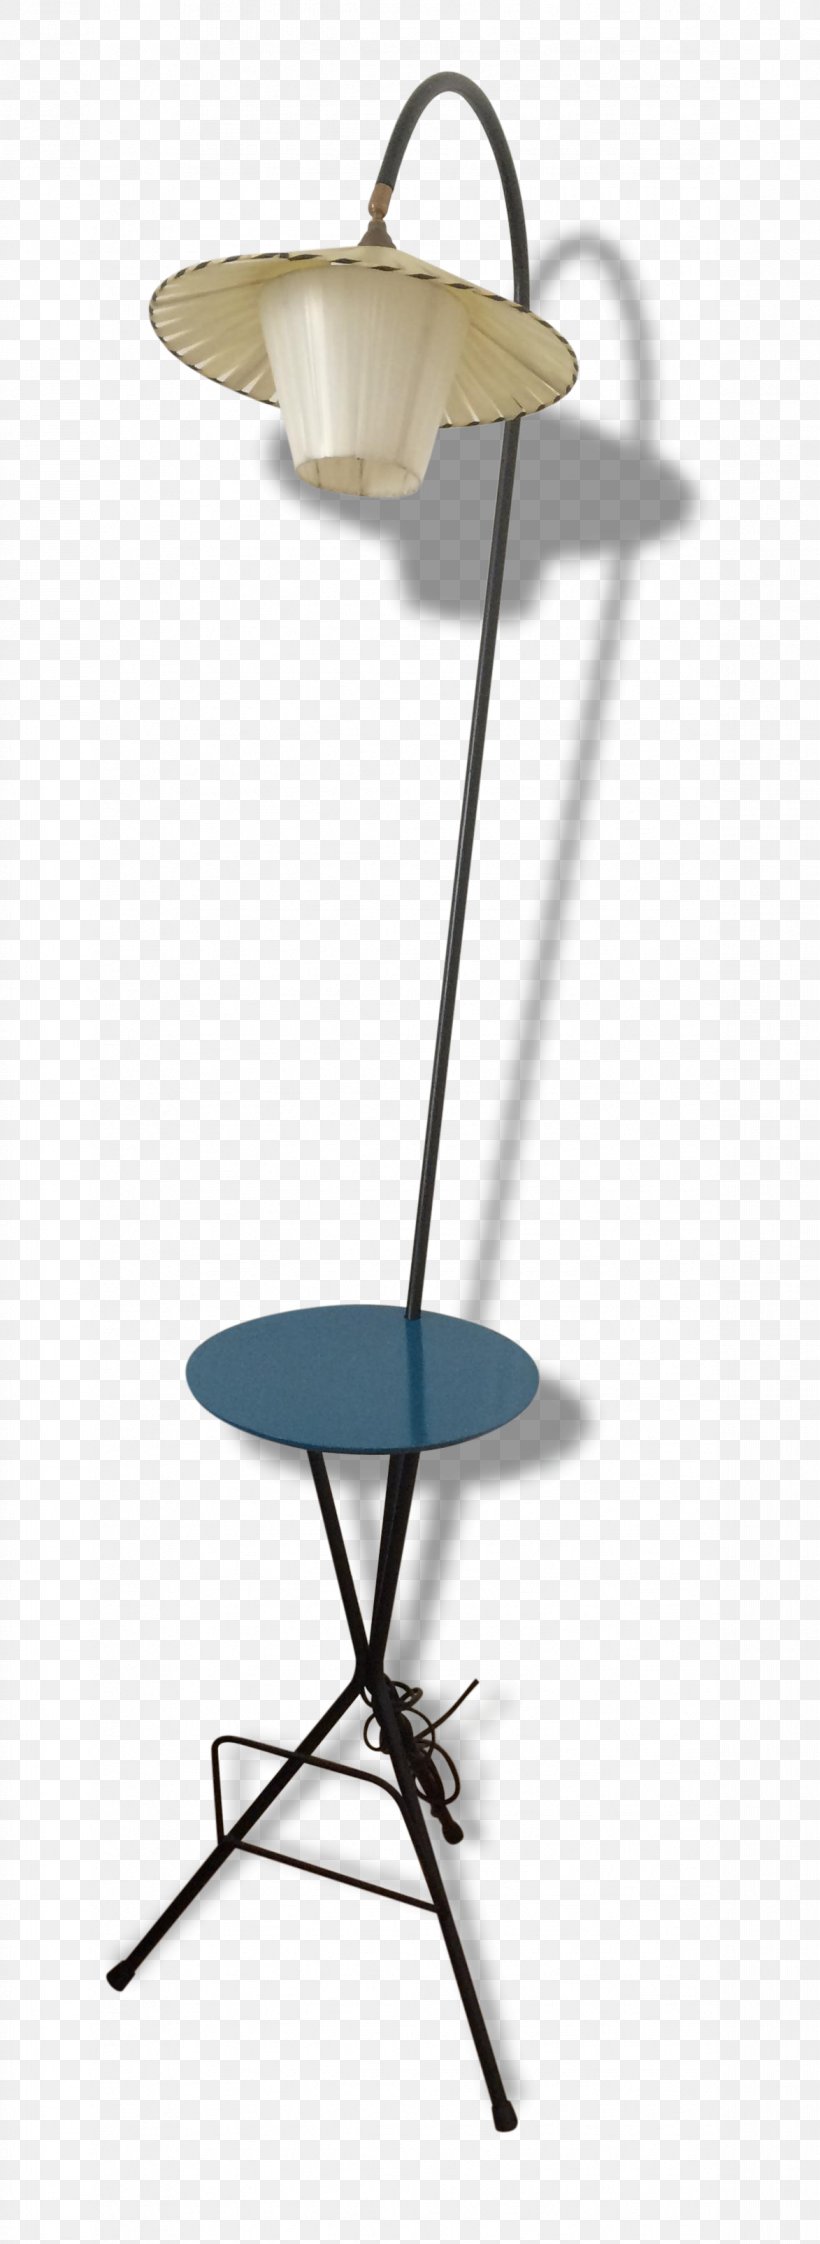 Line Angle Product Design, PNG, 1173x3211px, Table, Furniture, Lamp Download Free